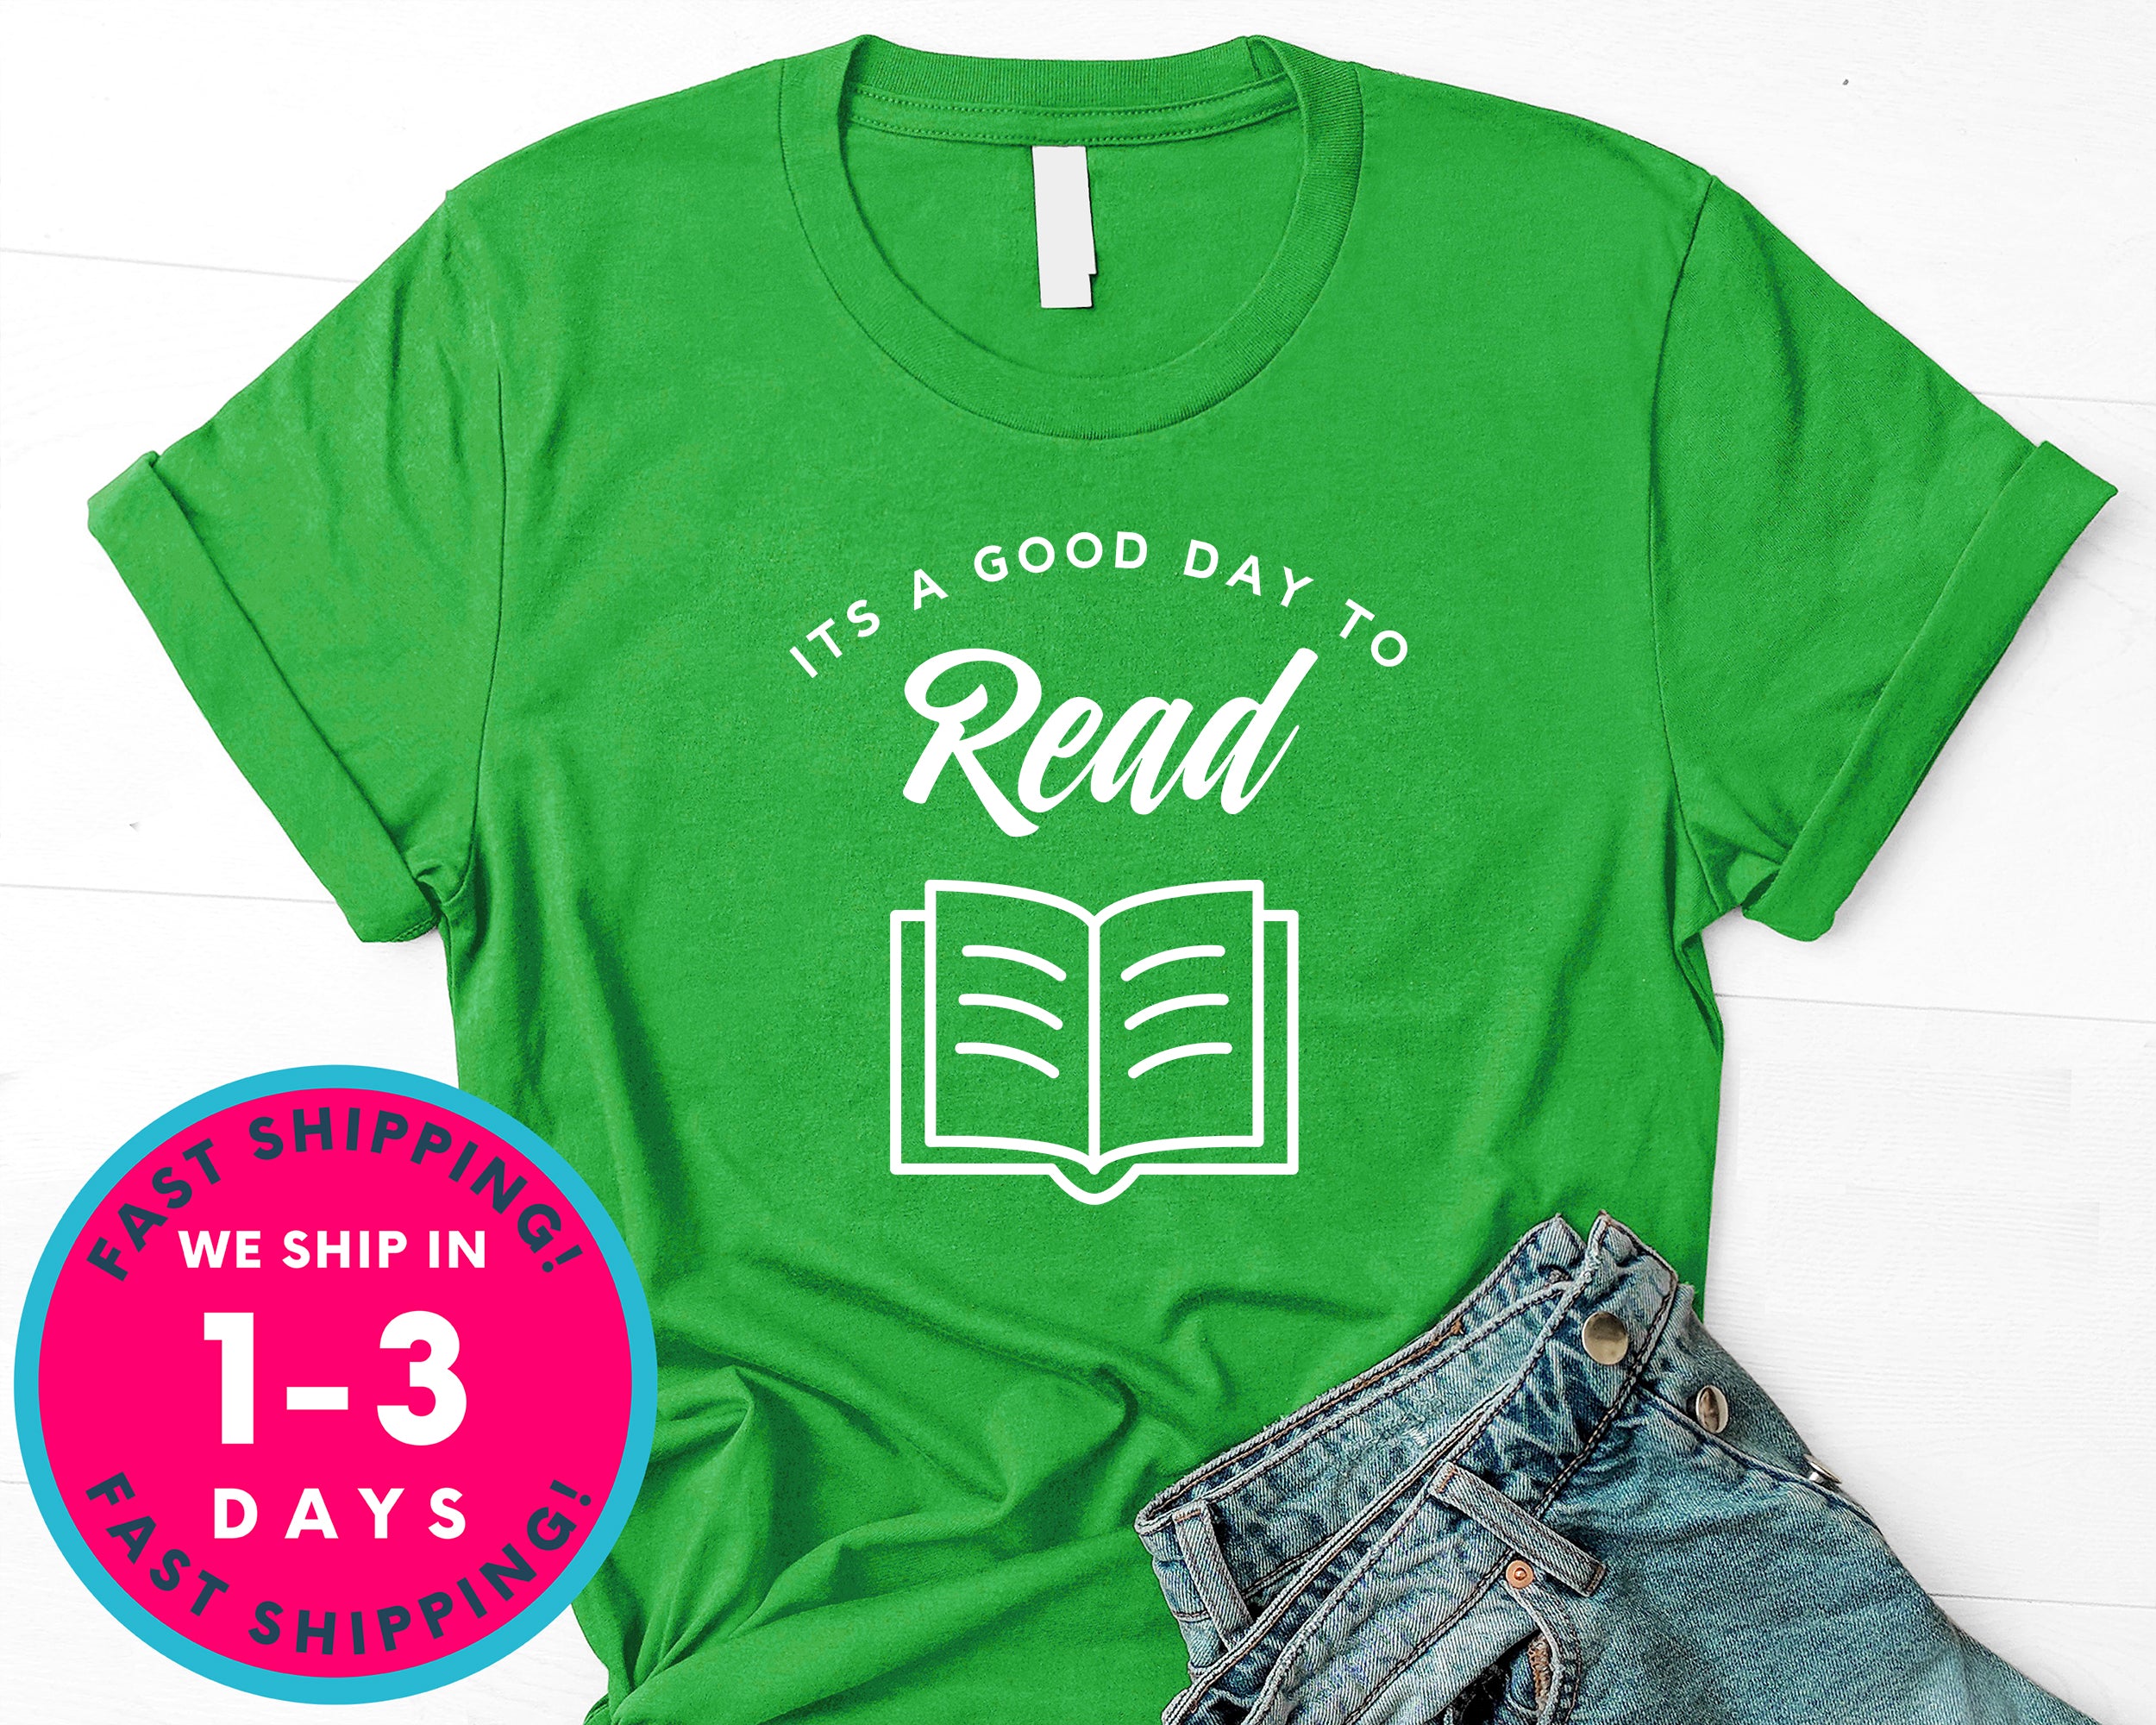 It's A Good Day To Read T-Shirt - Inspirational Quotes Saying Shirt